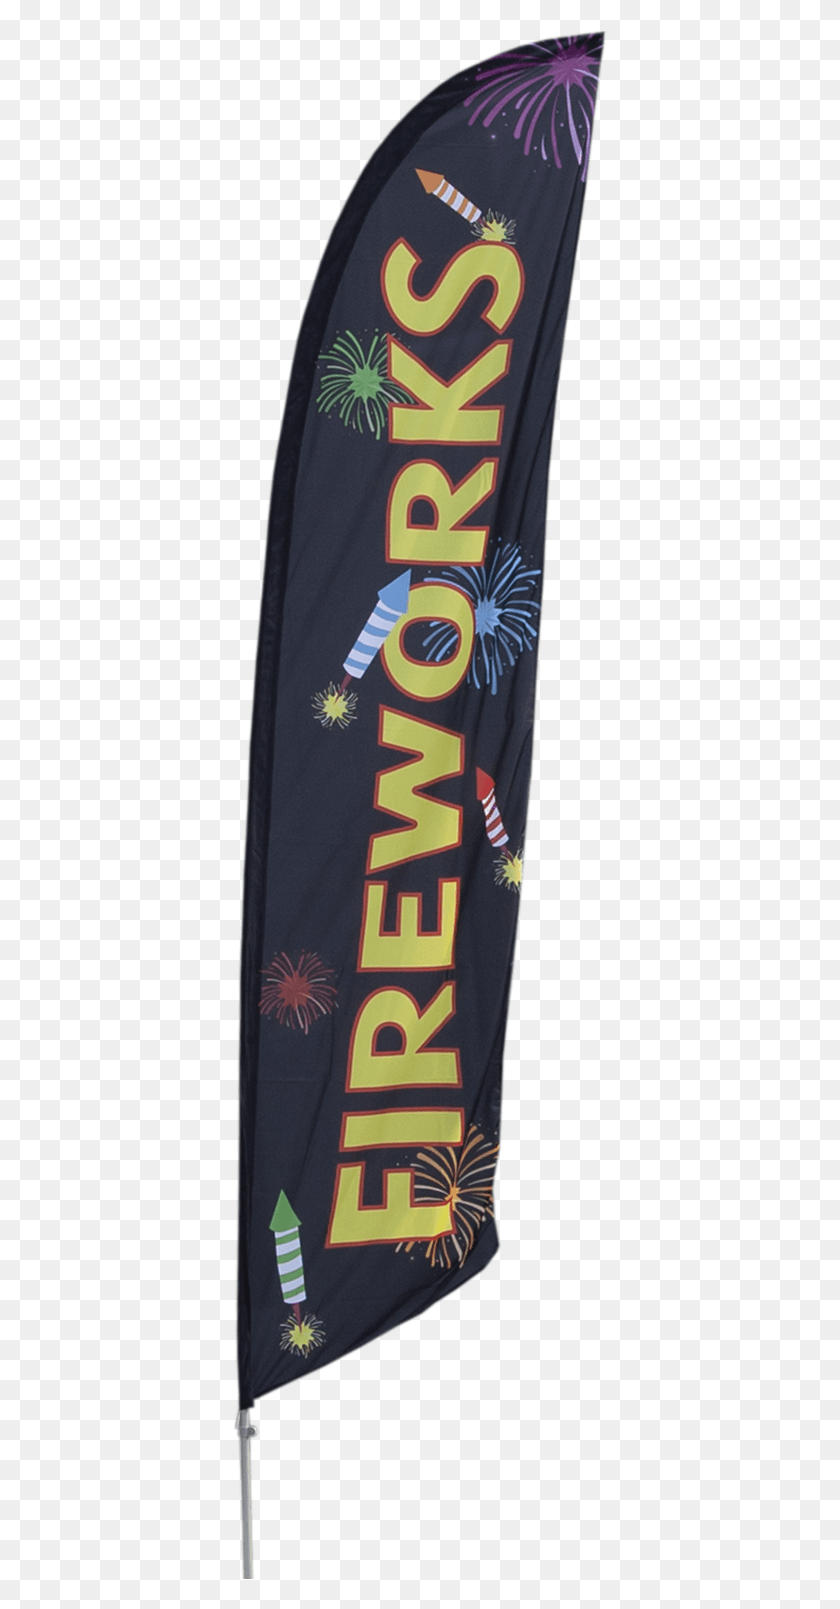 376x1549 Great Way For Fireworks Stores To Advertise Their Products Banner, Clothing, Apparel, Text Descargar Hd Png